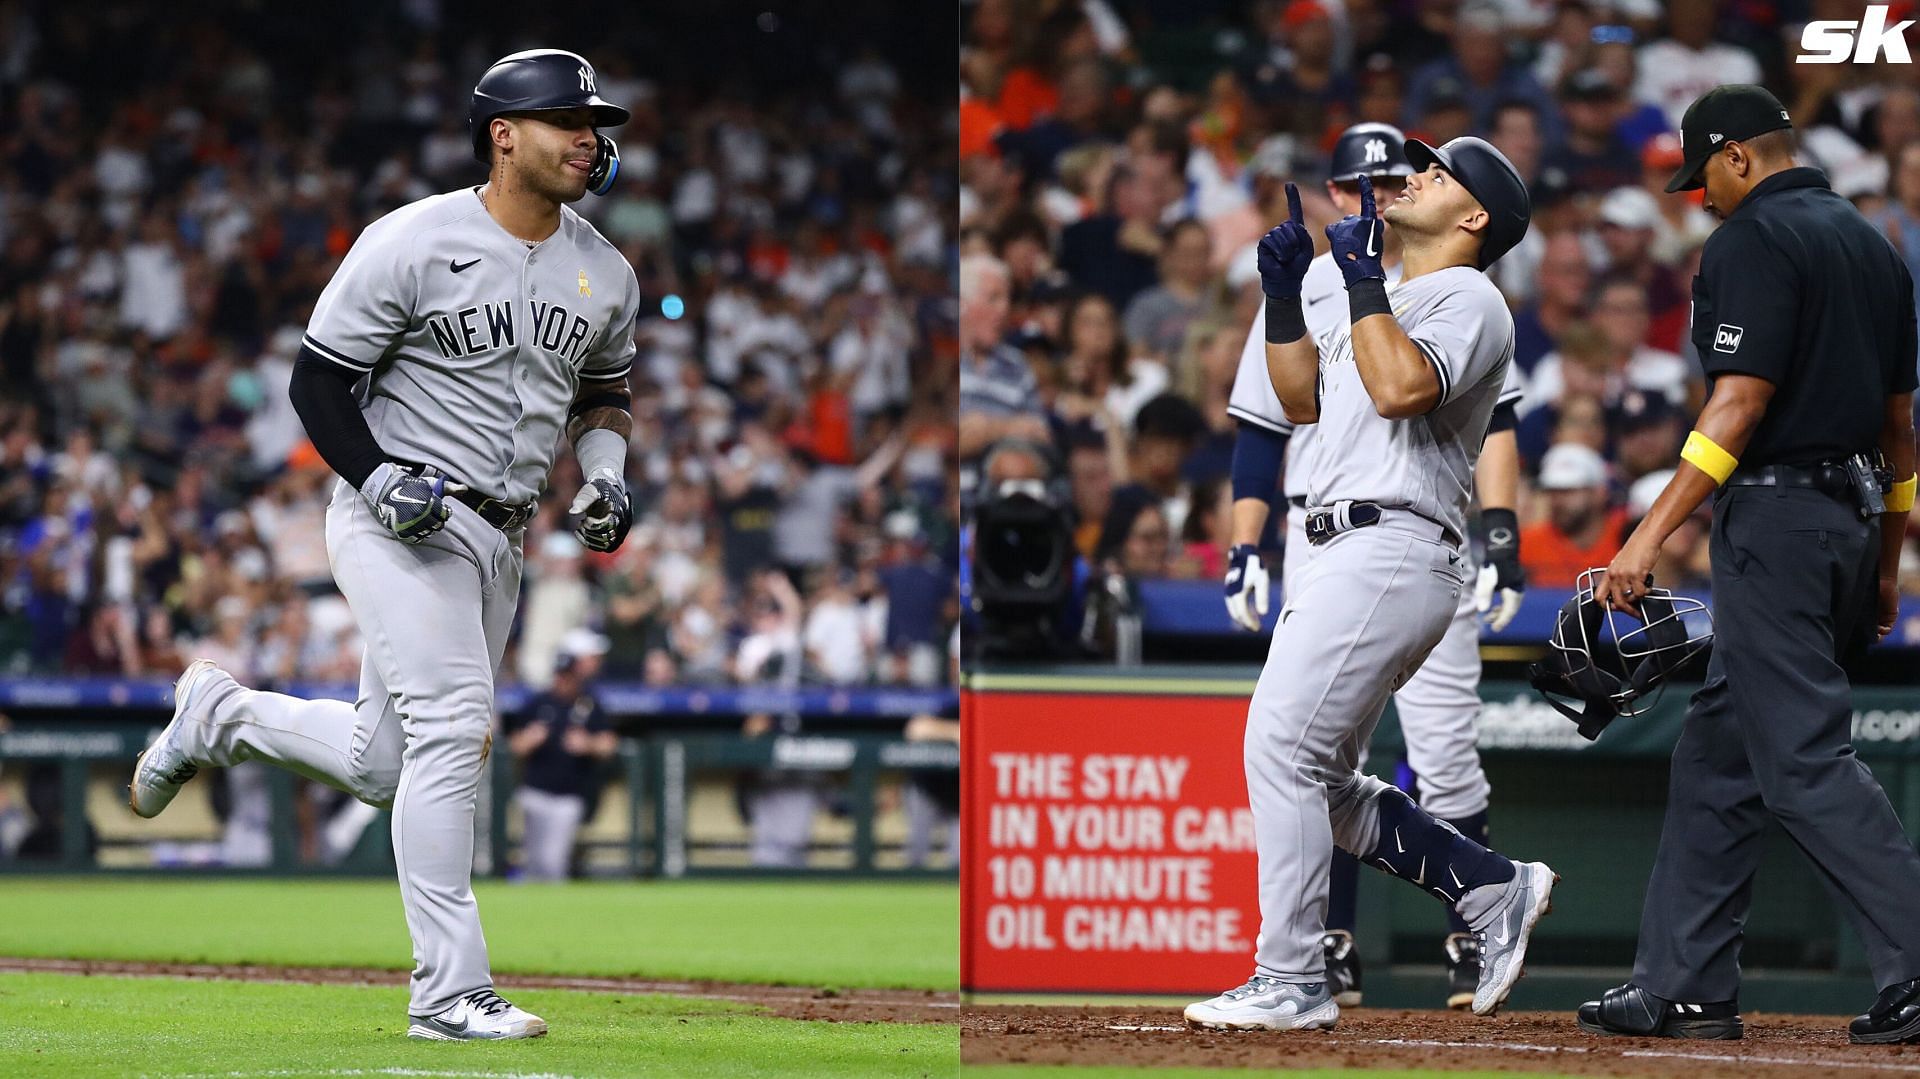 Yankees series sweep Astros for the first time since 2013